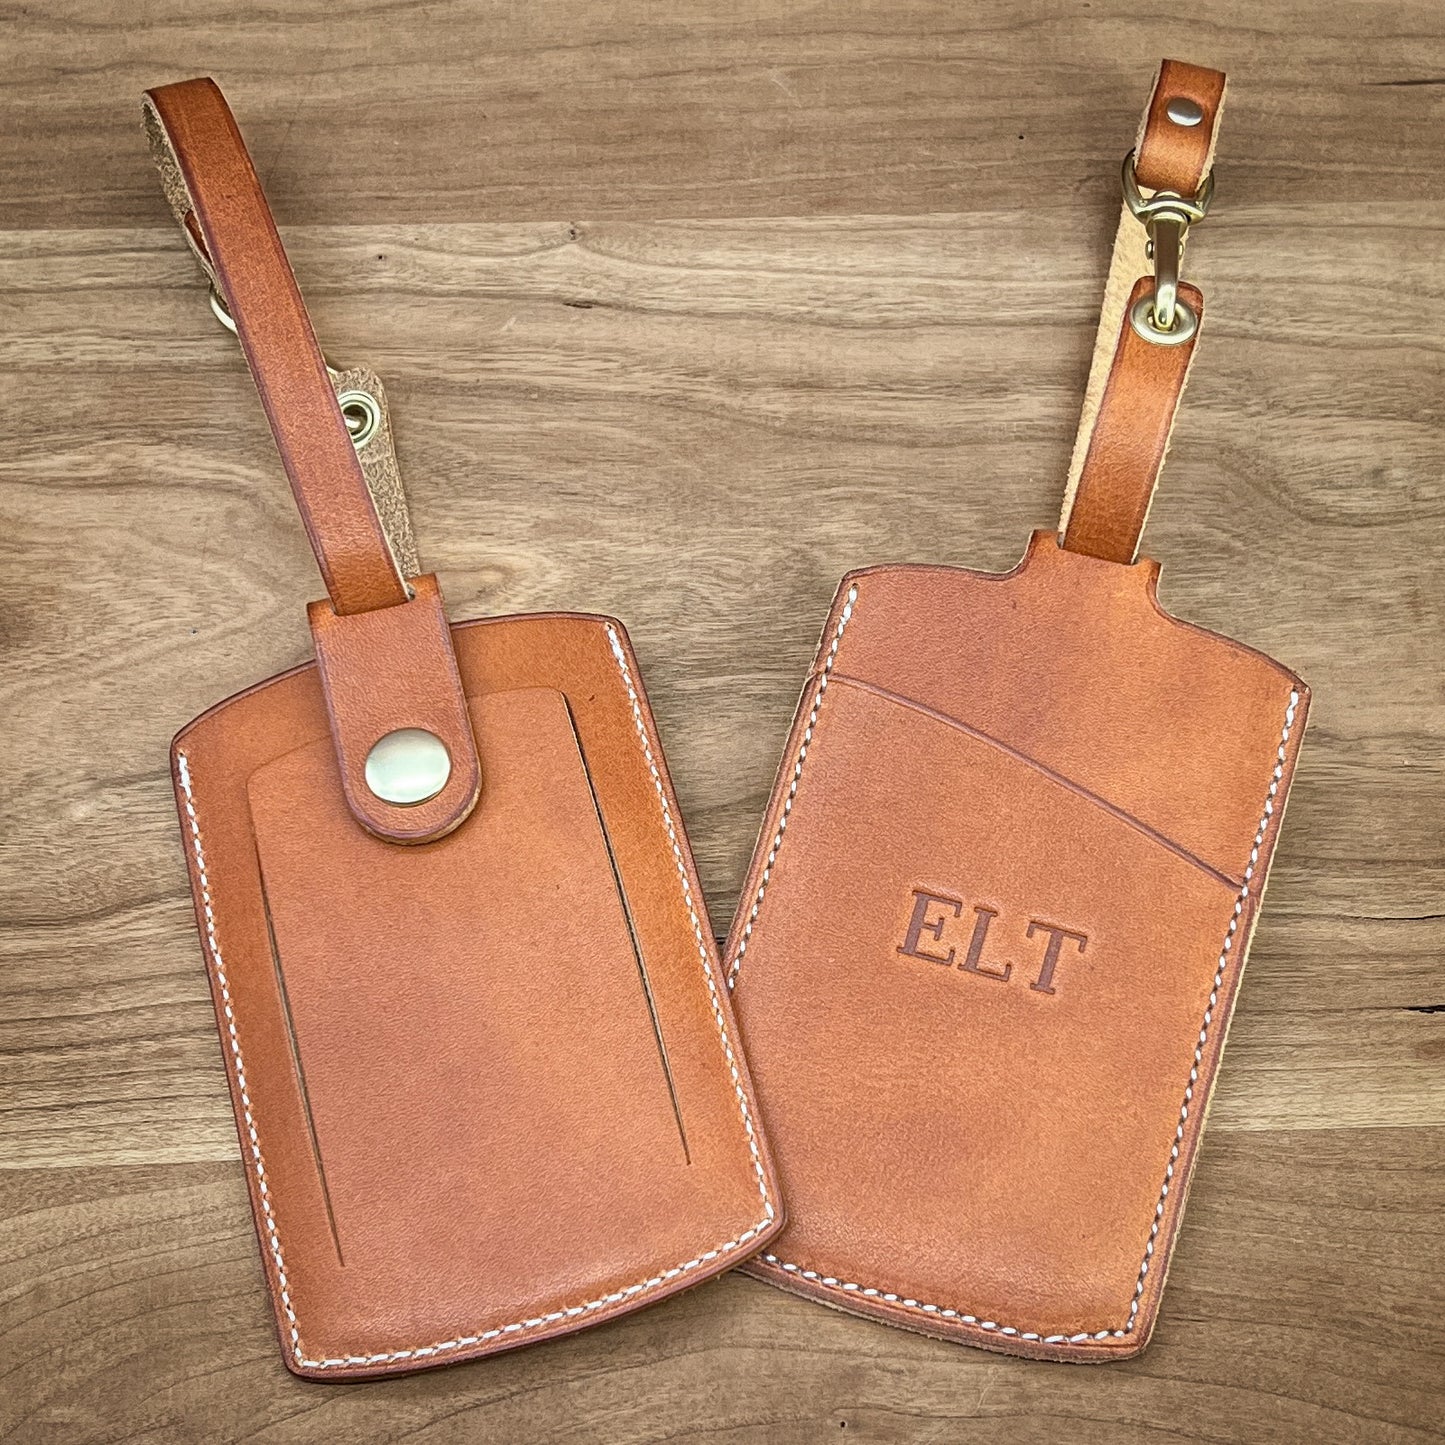 Personalized Leather Luggage Tags made in English Tan Horween Leather with white stitching and brass snap.  Custom made to order in Houston, Texas by Custom Leather and Pen